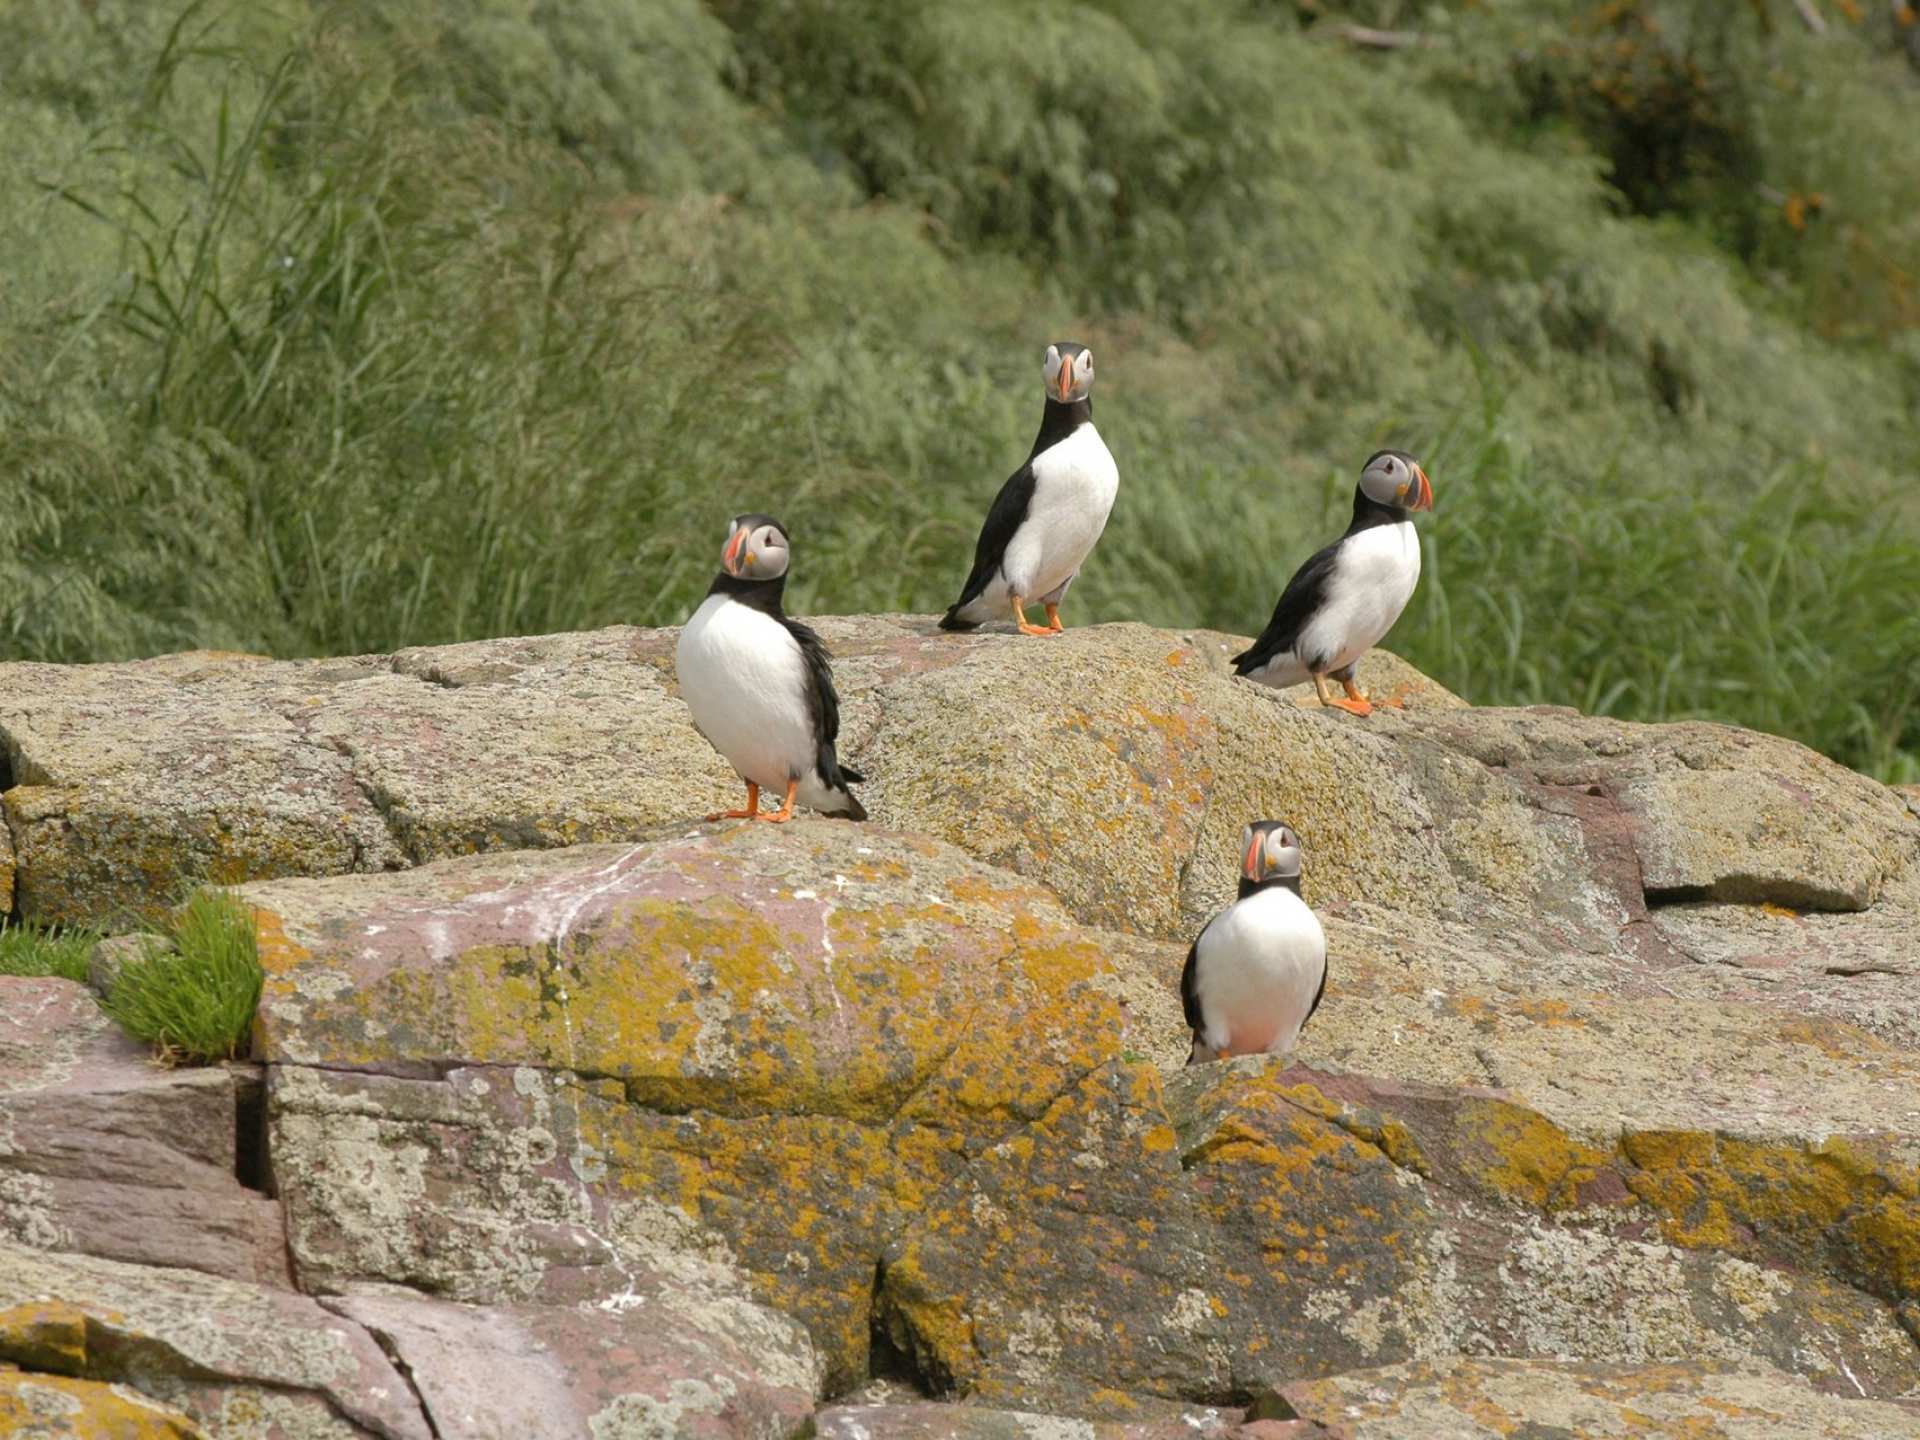 Newfoundland travel | Puffins perched on a rock in Newfoundland and Labrador